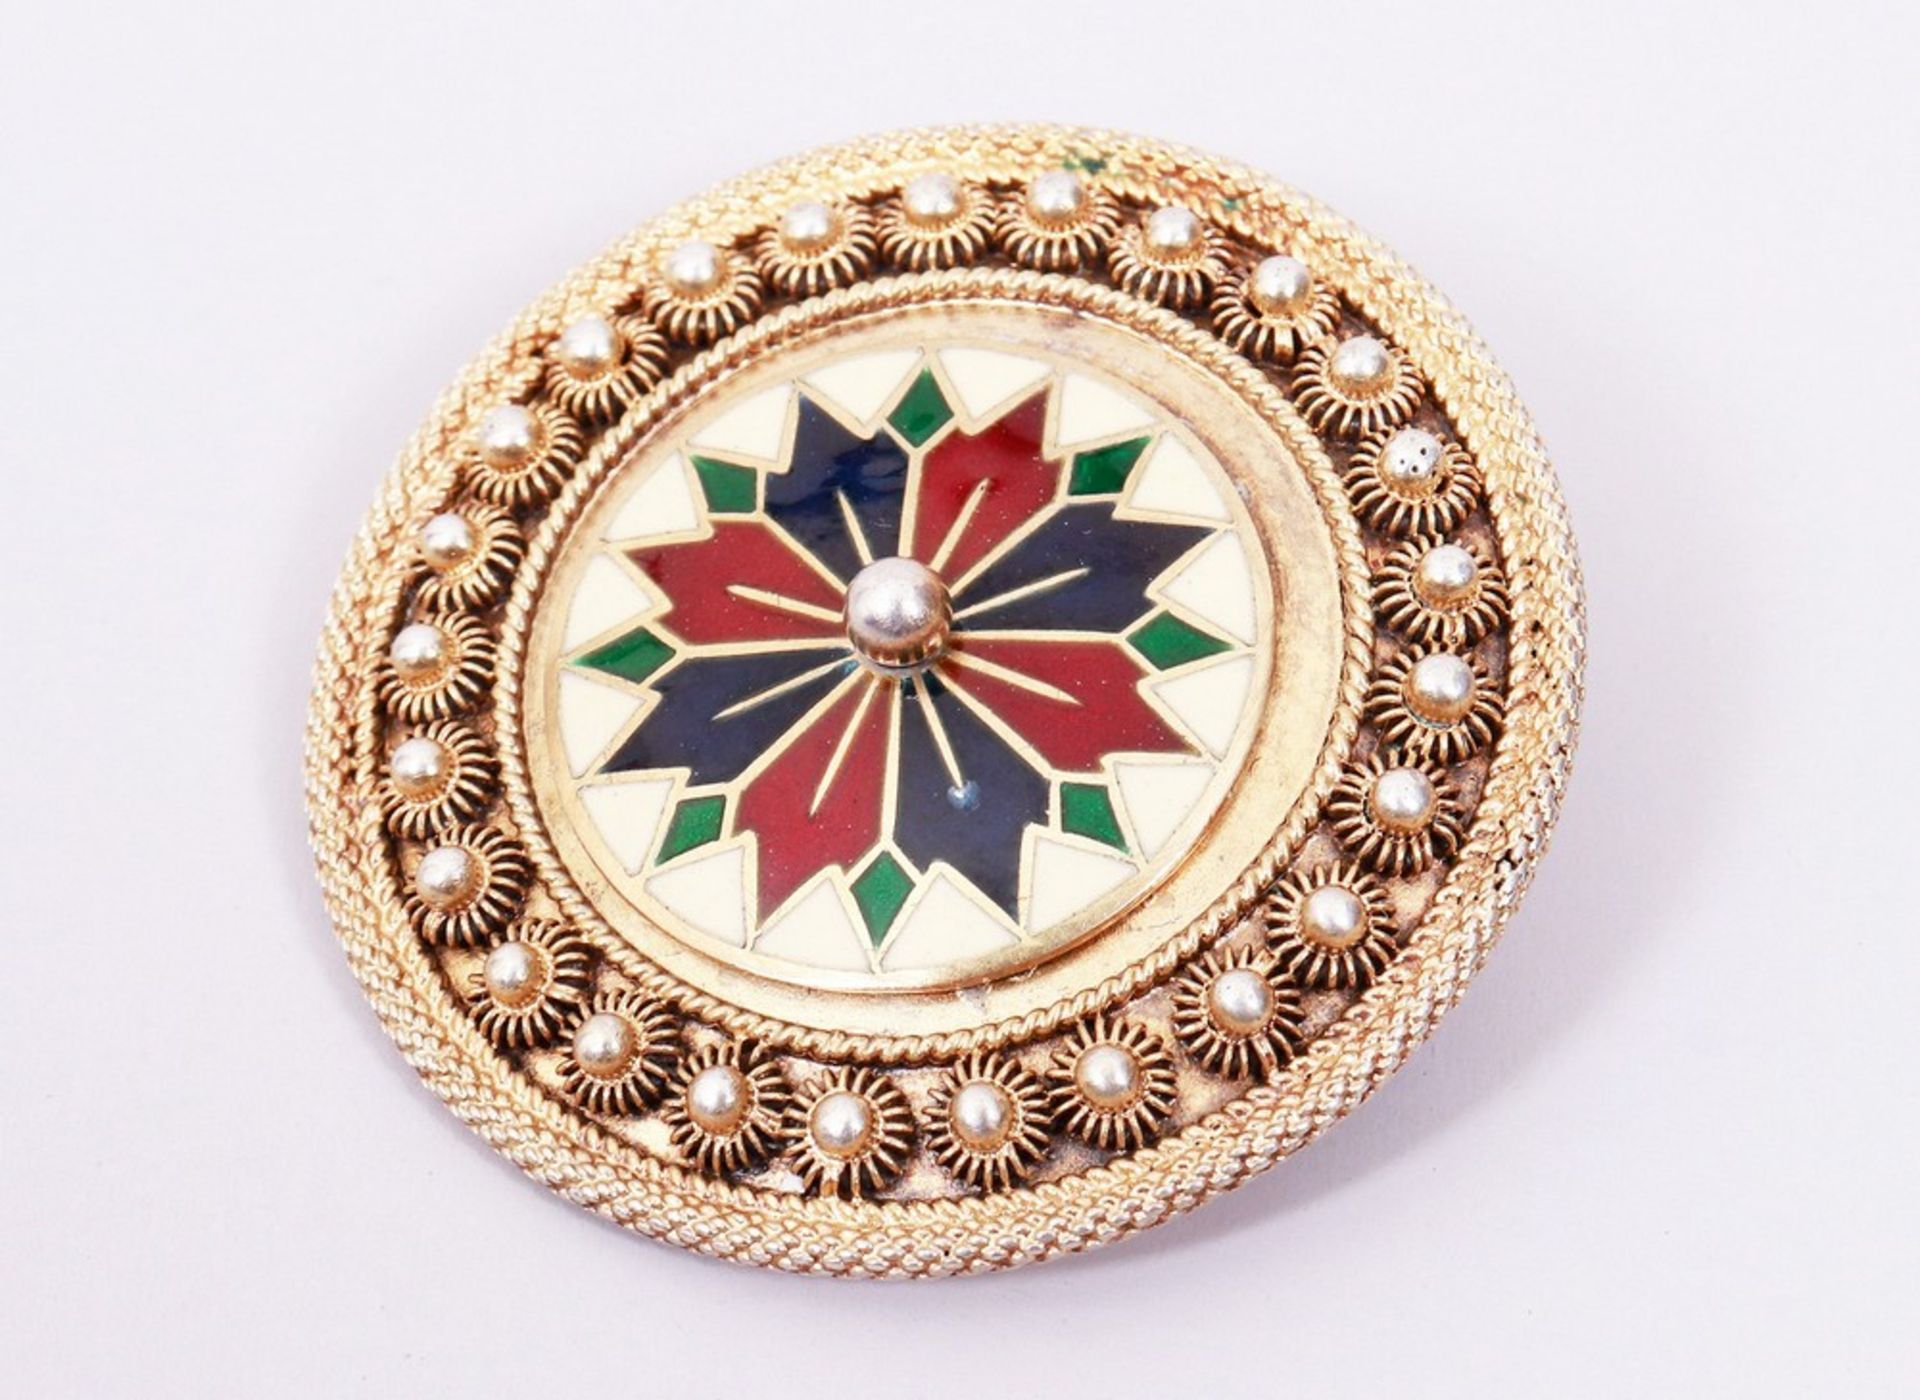 Traditional costume brooch, 830 silver/gold-plated, David Andersen, Christiania - Norway, c. 1900 - Image 3 of 5